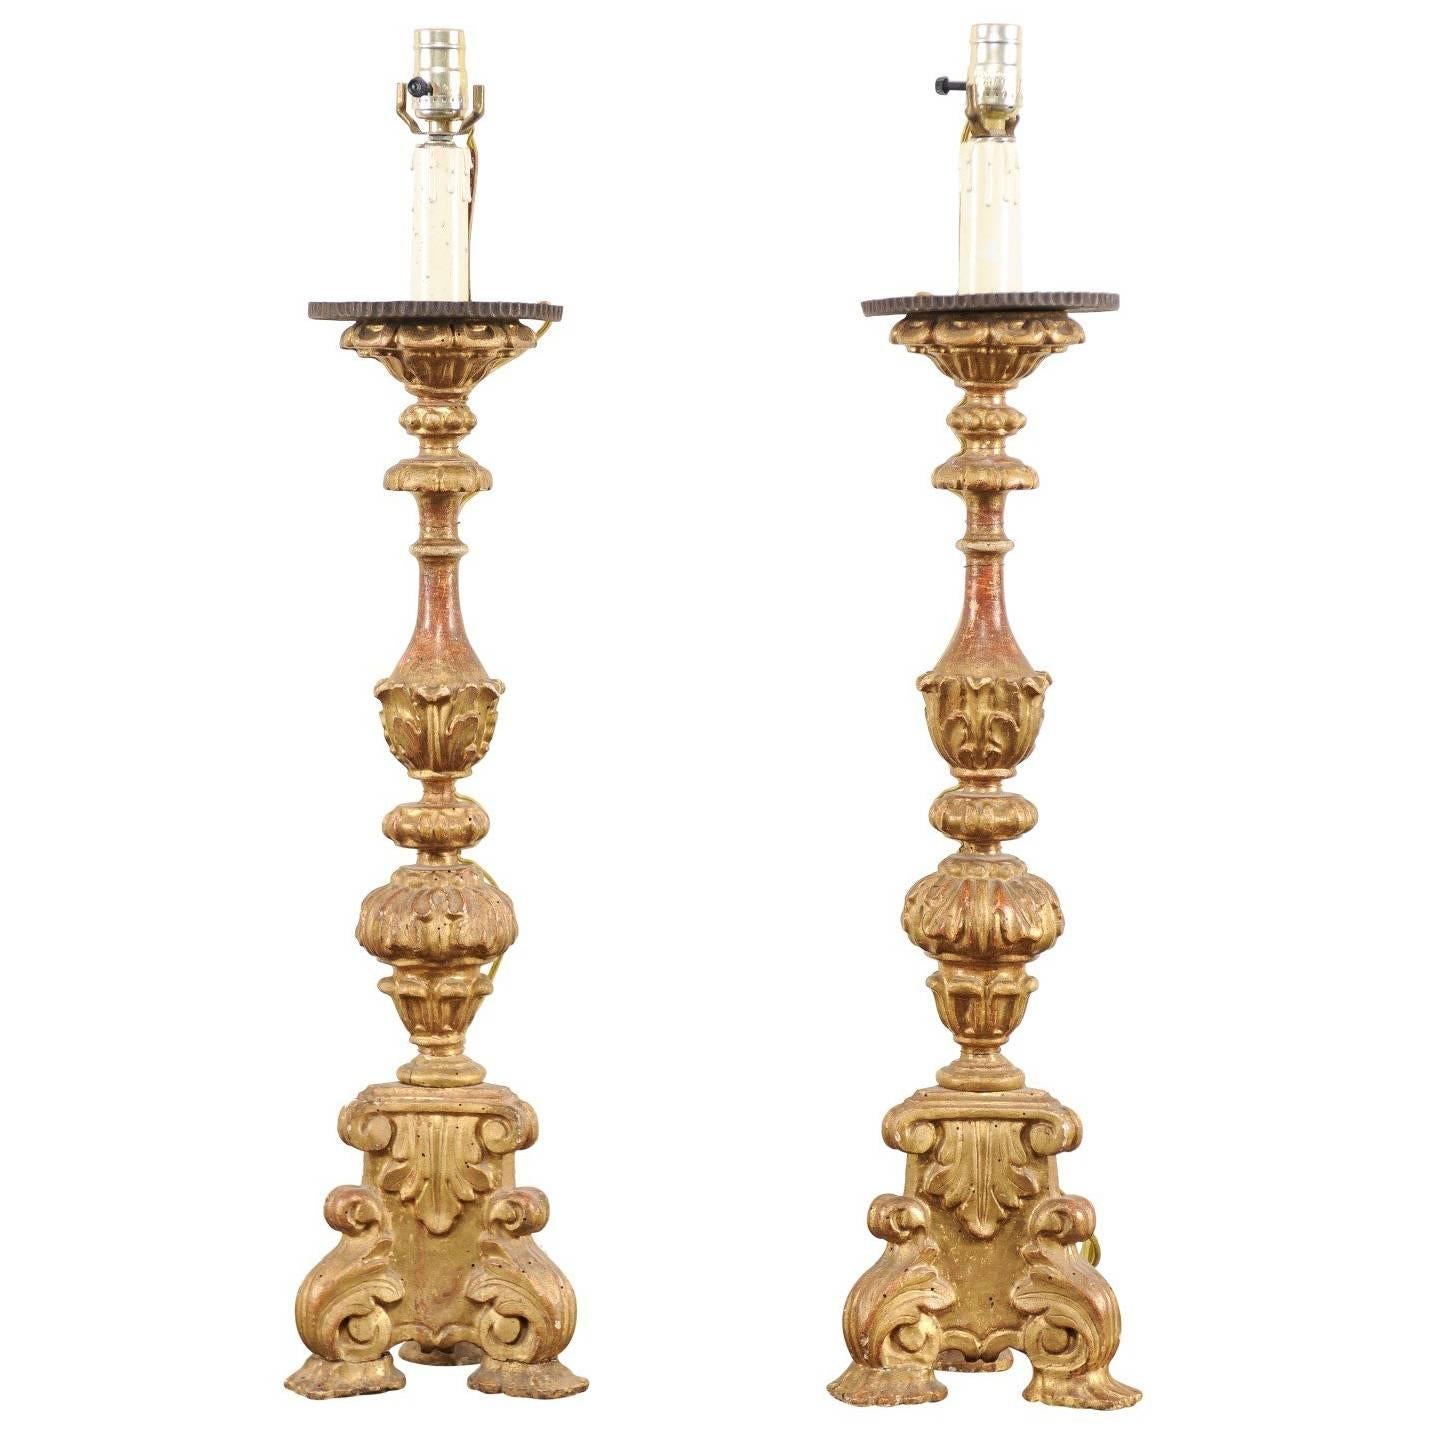 Pair of Italian Tall Giltwood Richly Carved Candlestick Table Lamps